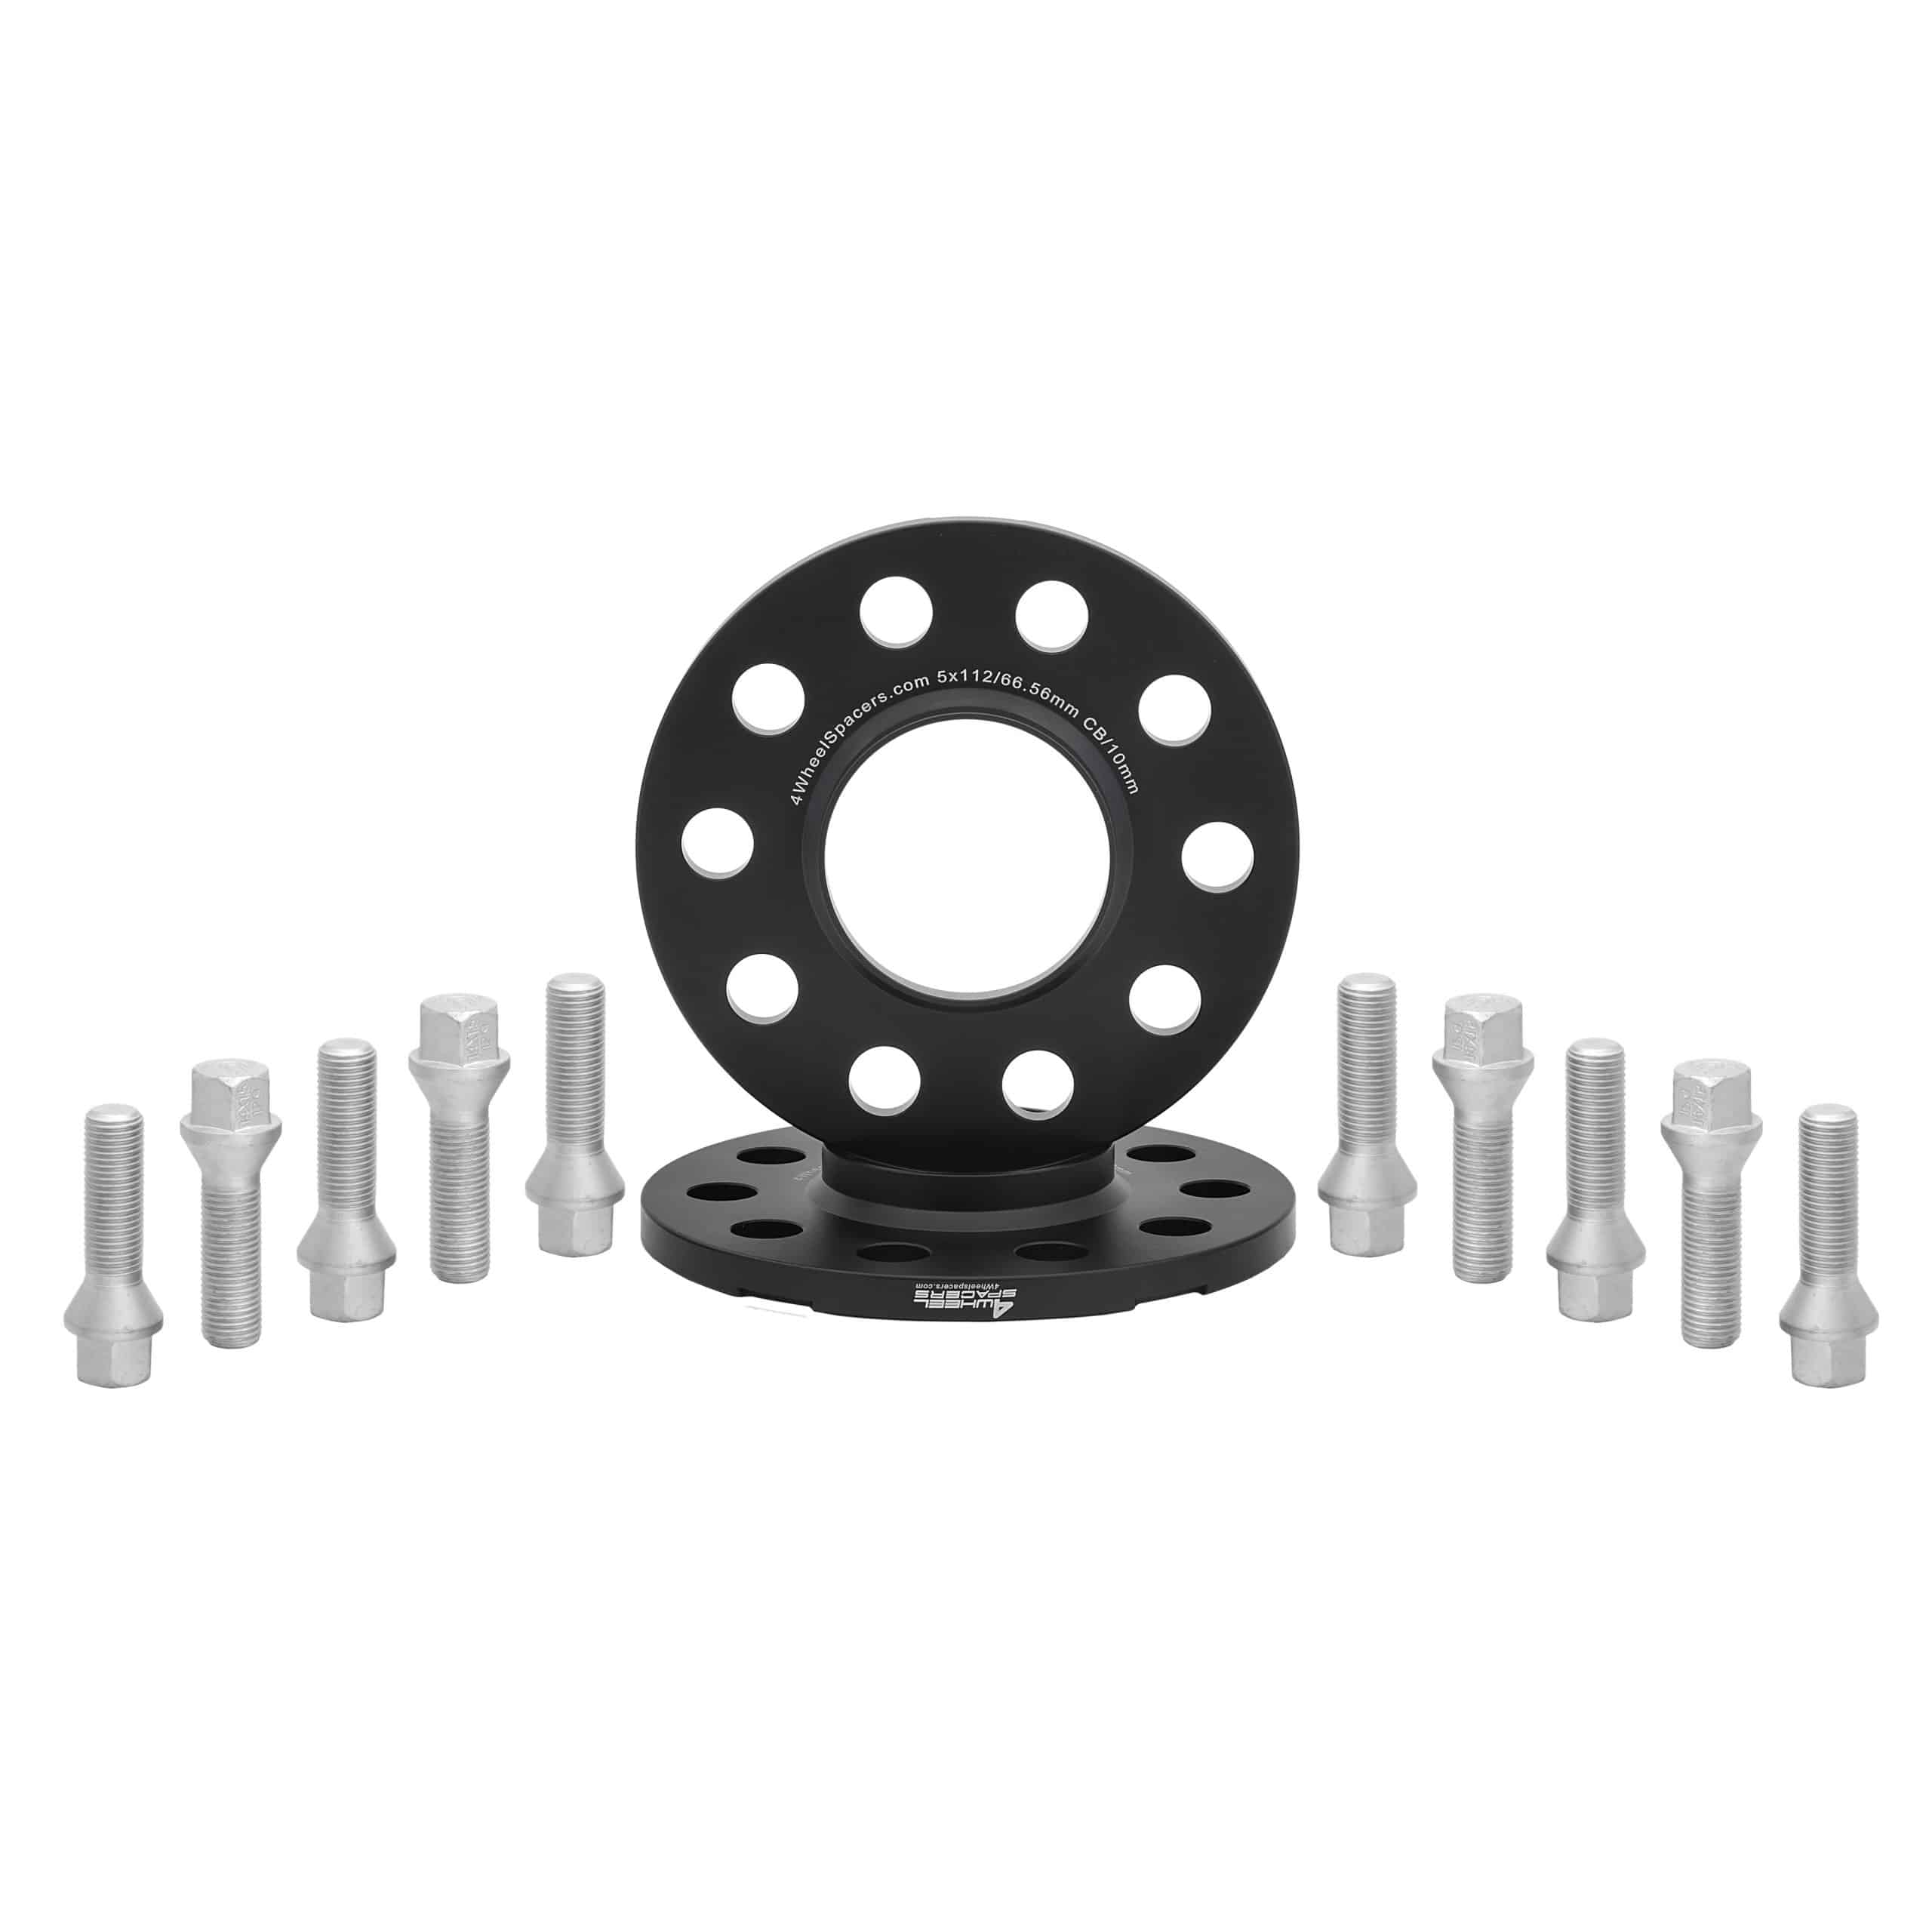 Audi 10mm Hub-Centric Wheel Spacers With Conical Seat Bolt Kit, 4WheelSpacers.com